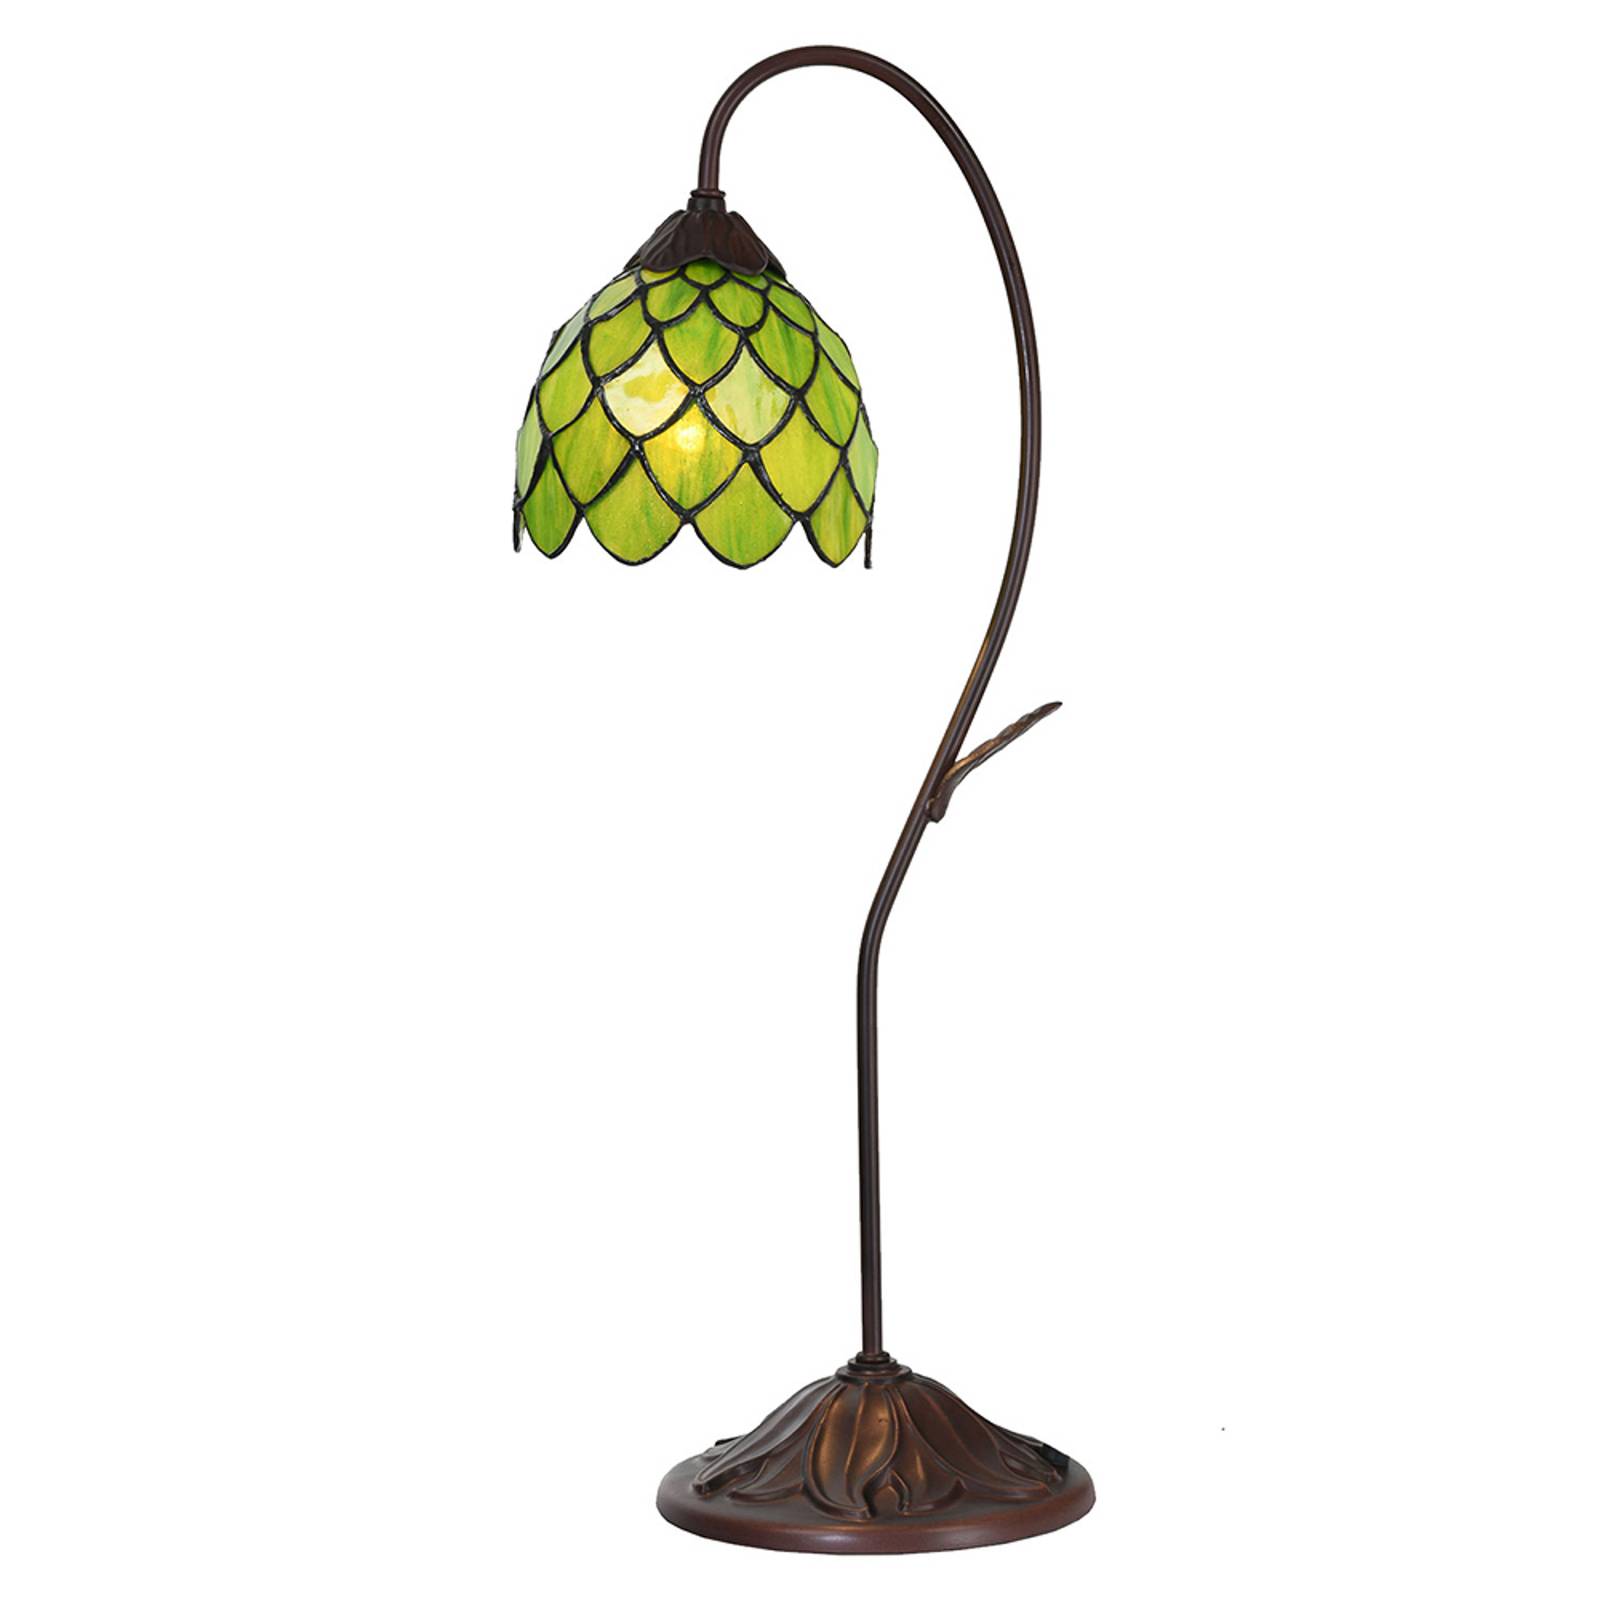 clayre&eef lampe à poser 5ll-6045, verte, style tiffany